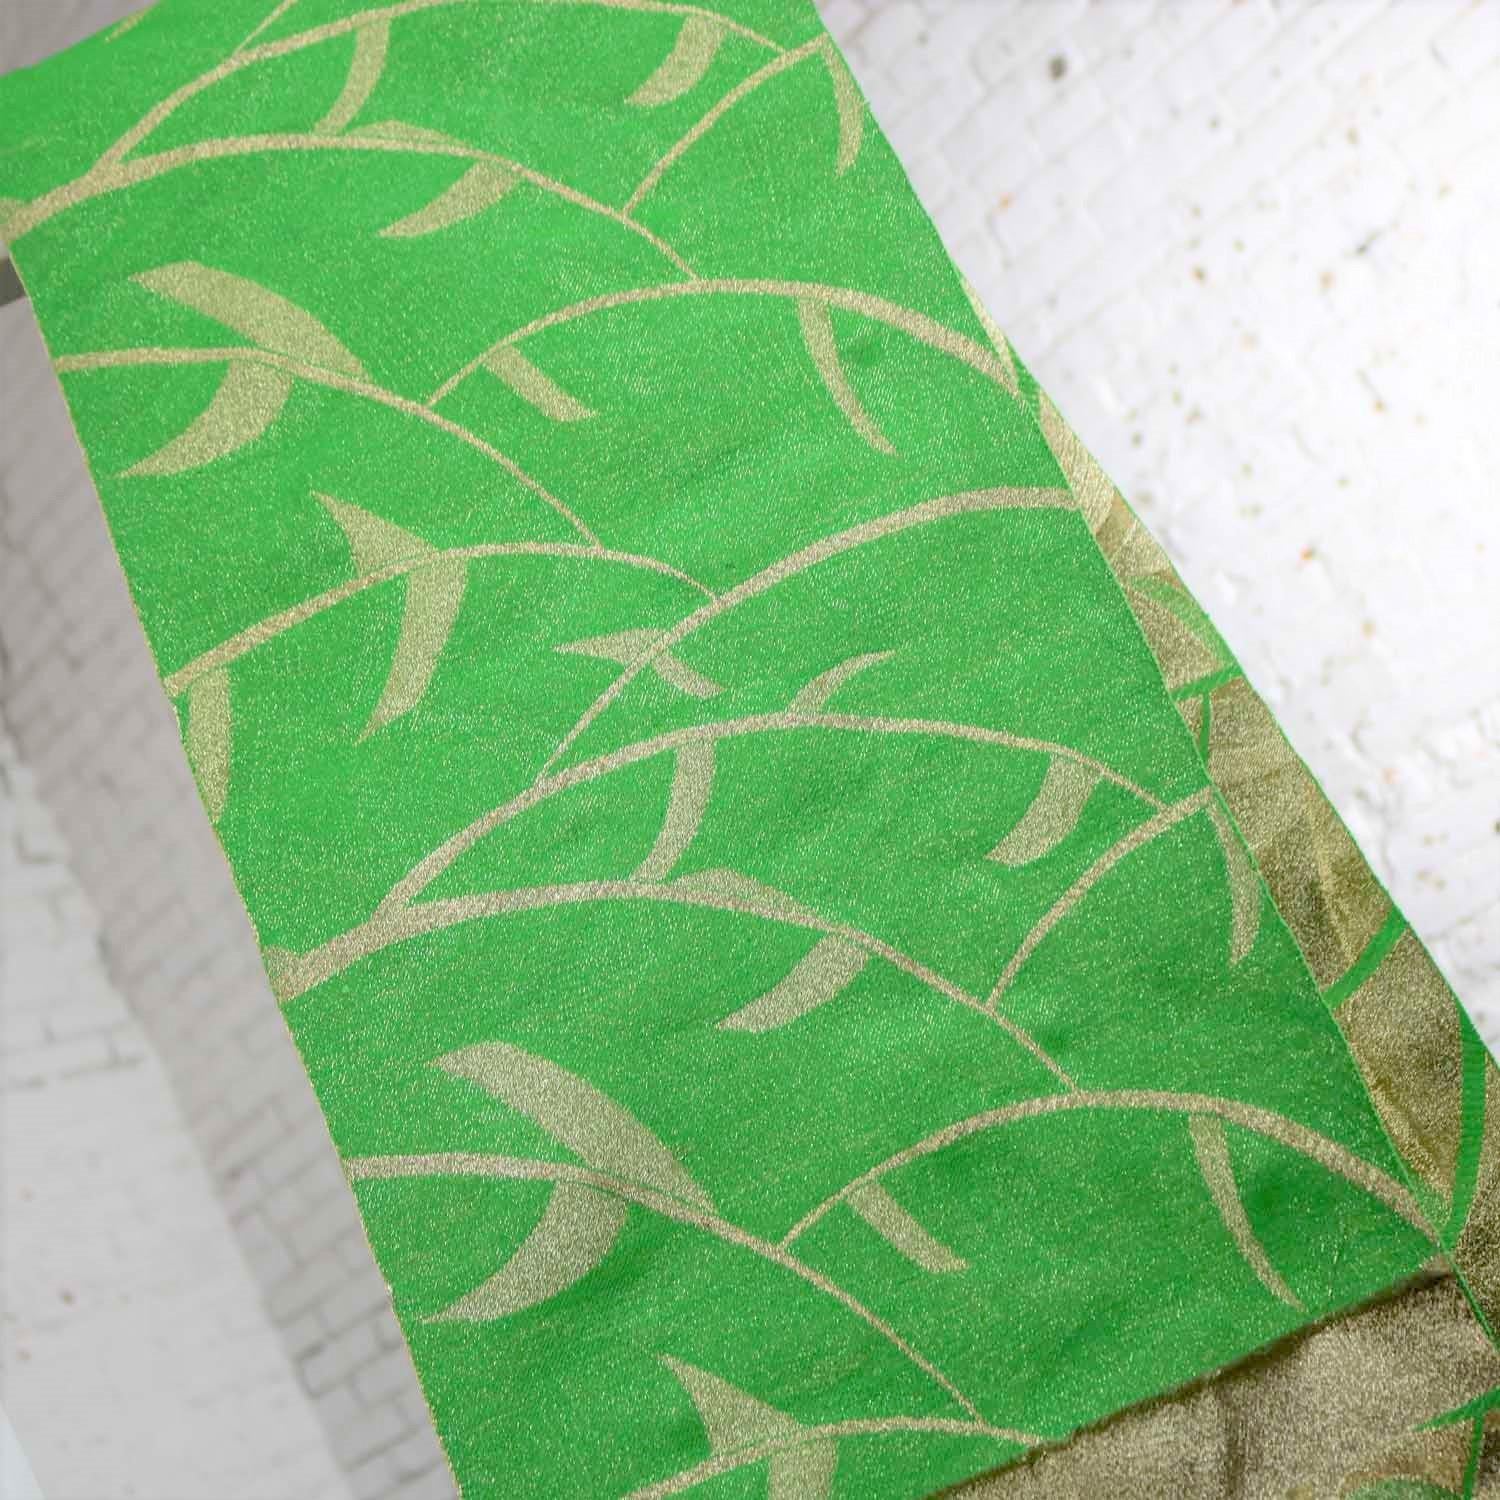 Vintage Emerald Green and Gold Lame Japanese Obi with Geometric Leaf Design For Sale 4